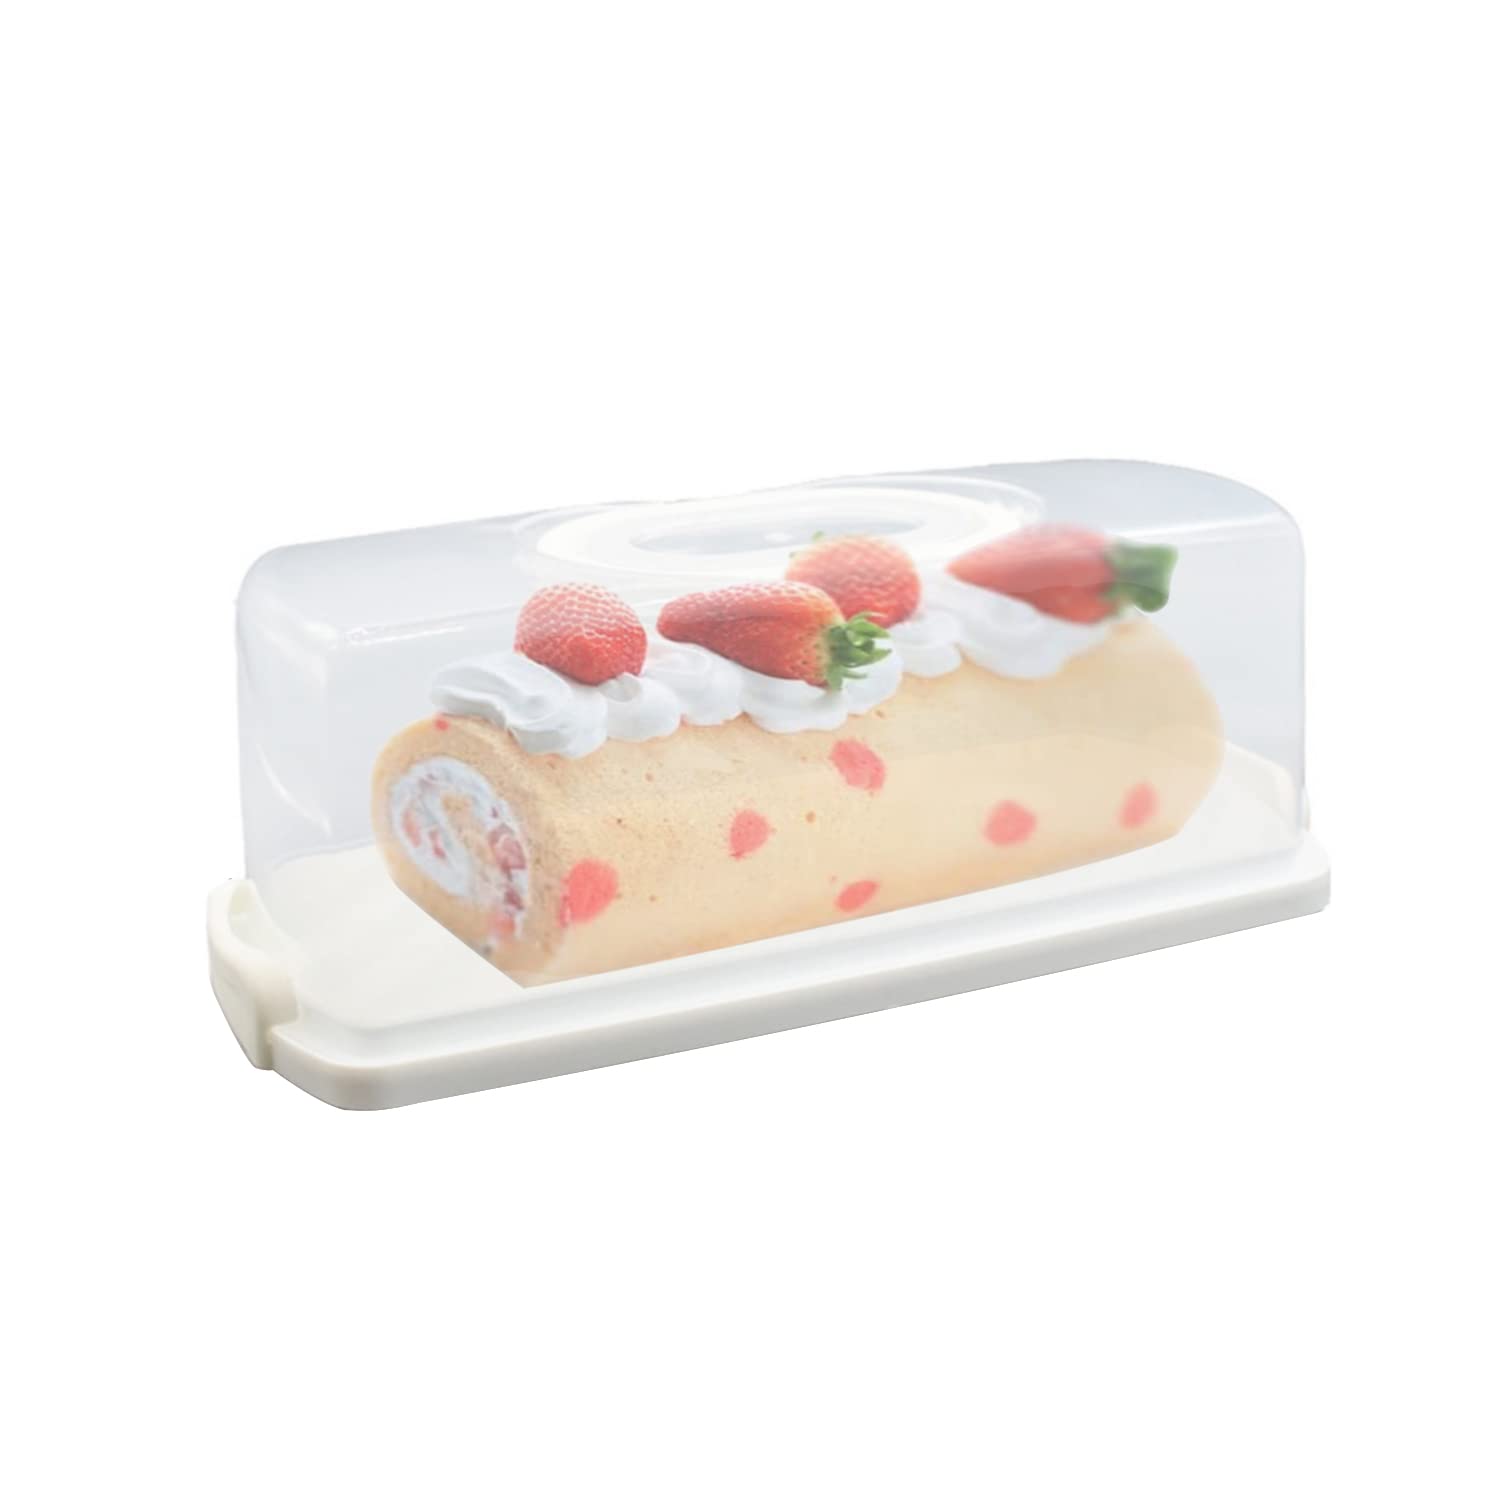 Portable Plastic Rectangular Loaf Bread Box, 13inch Translucent Cake  Container Keeper for Buns Rolls Pumpkin Cakes Bagels Pastries Doughnut White